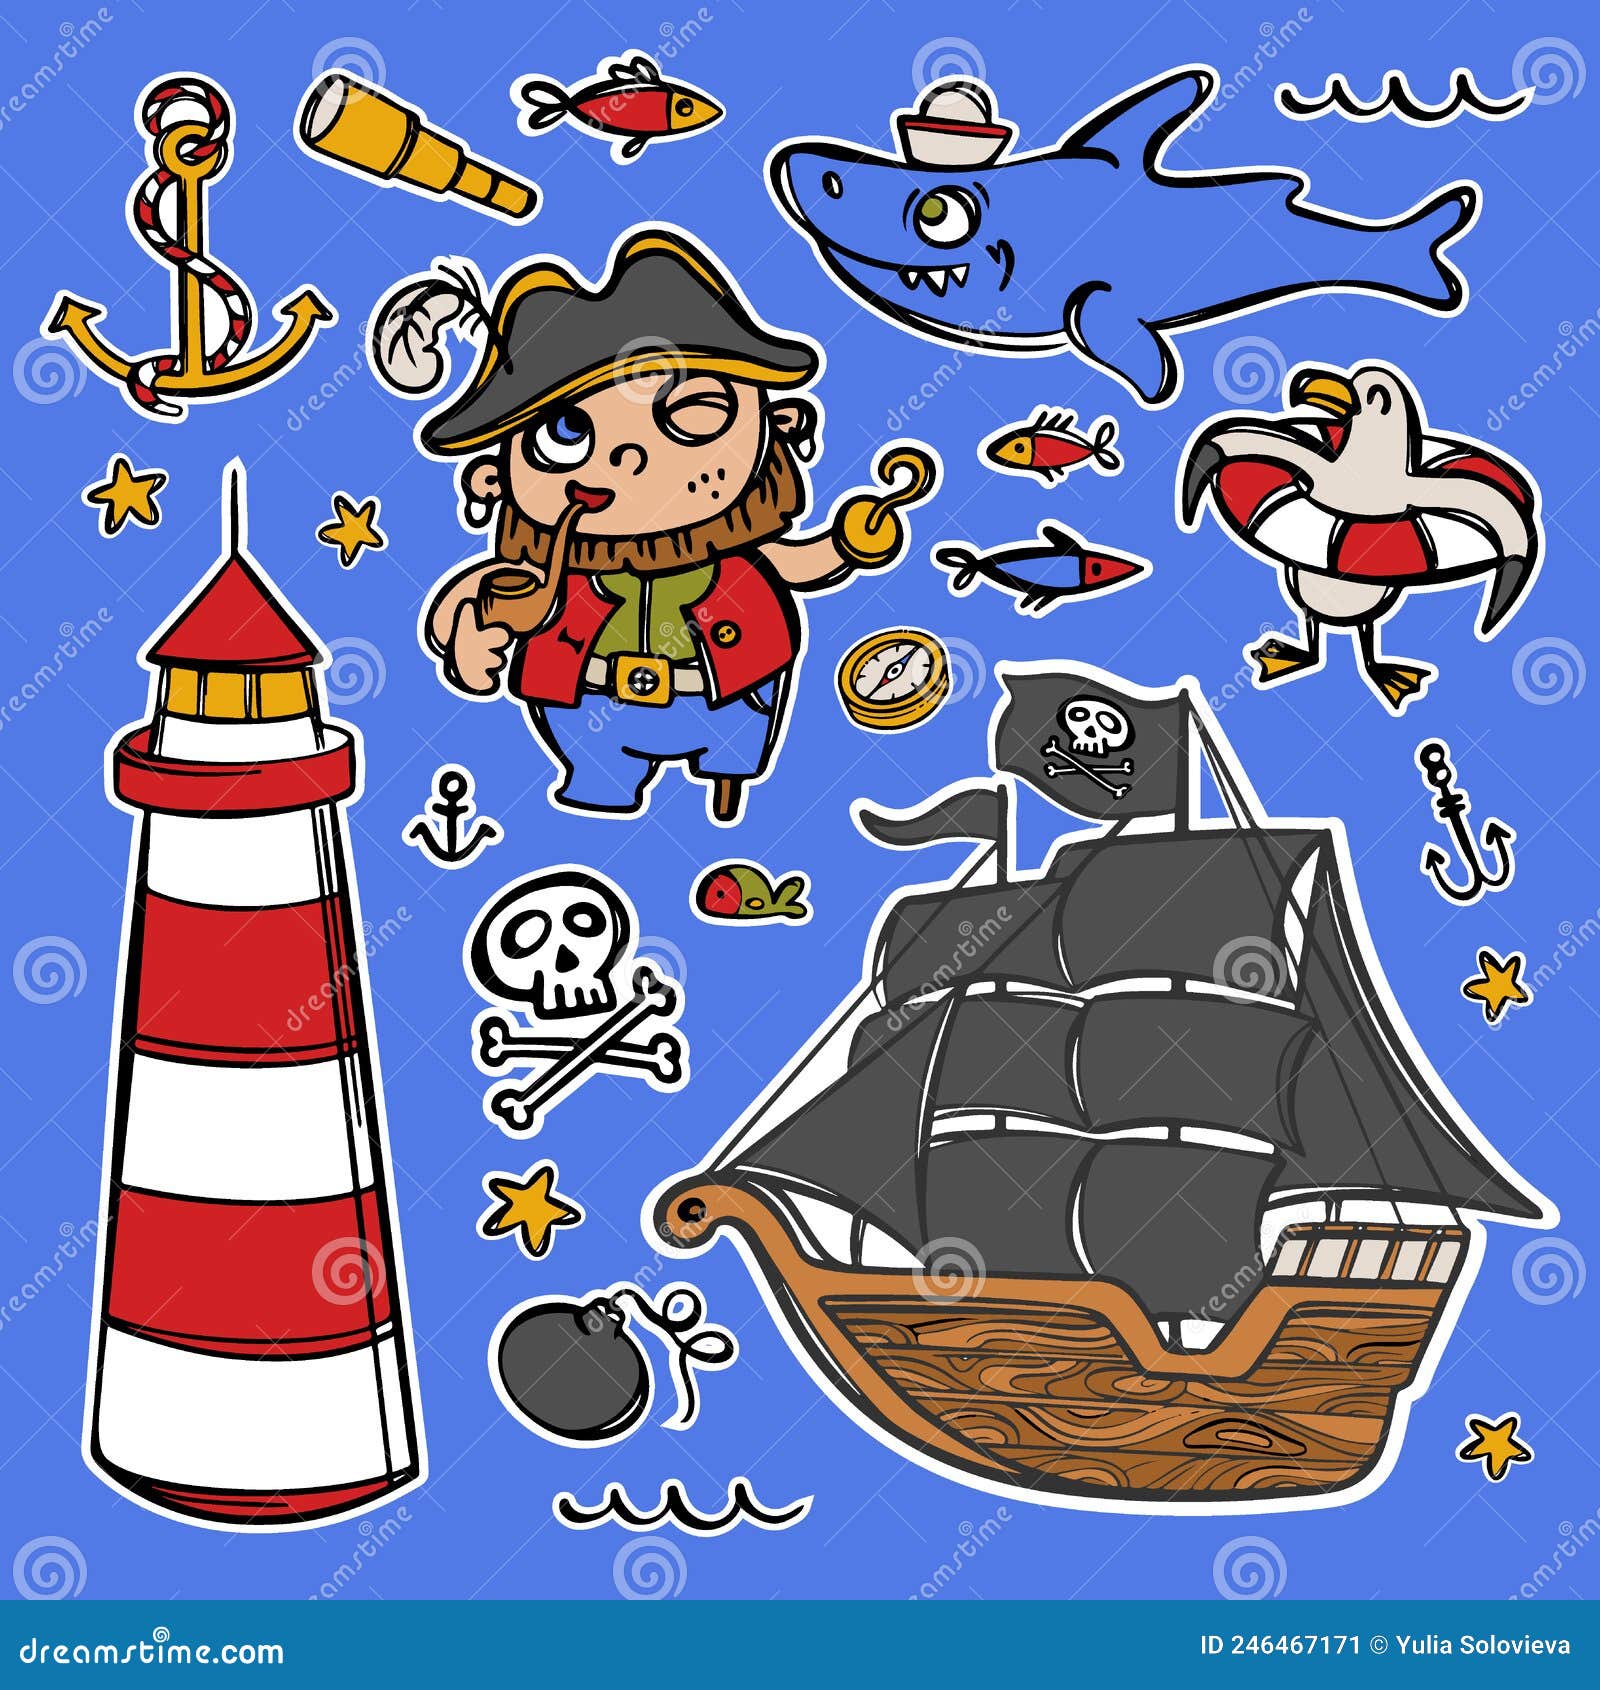 CAPTAIN HOOK and LIGHTHOUSE Pirate Sticker Vector Collection Stock